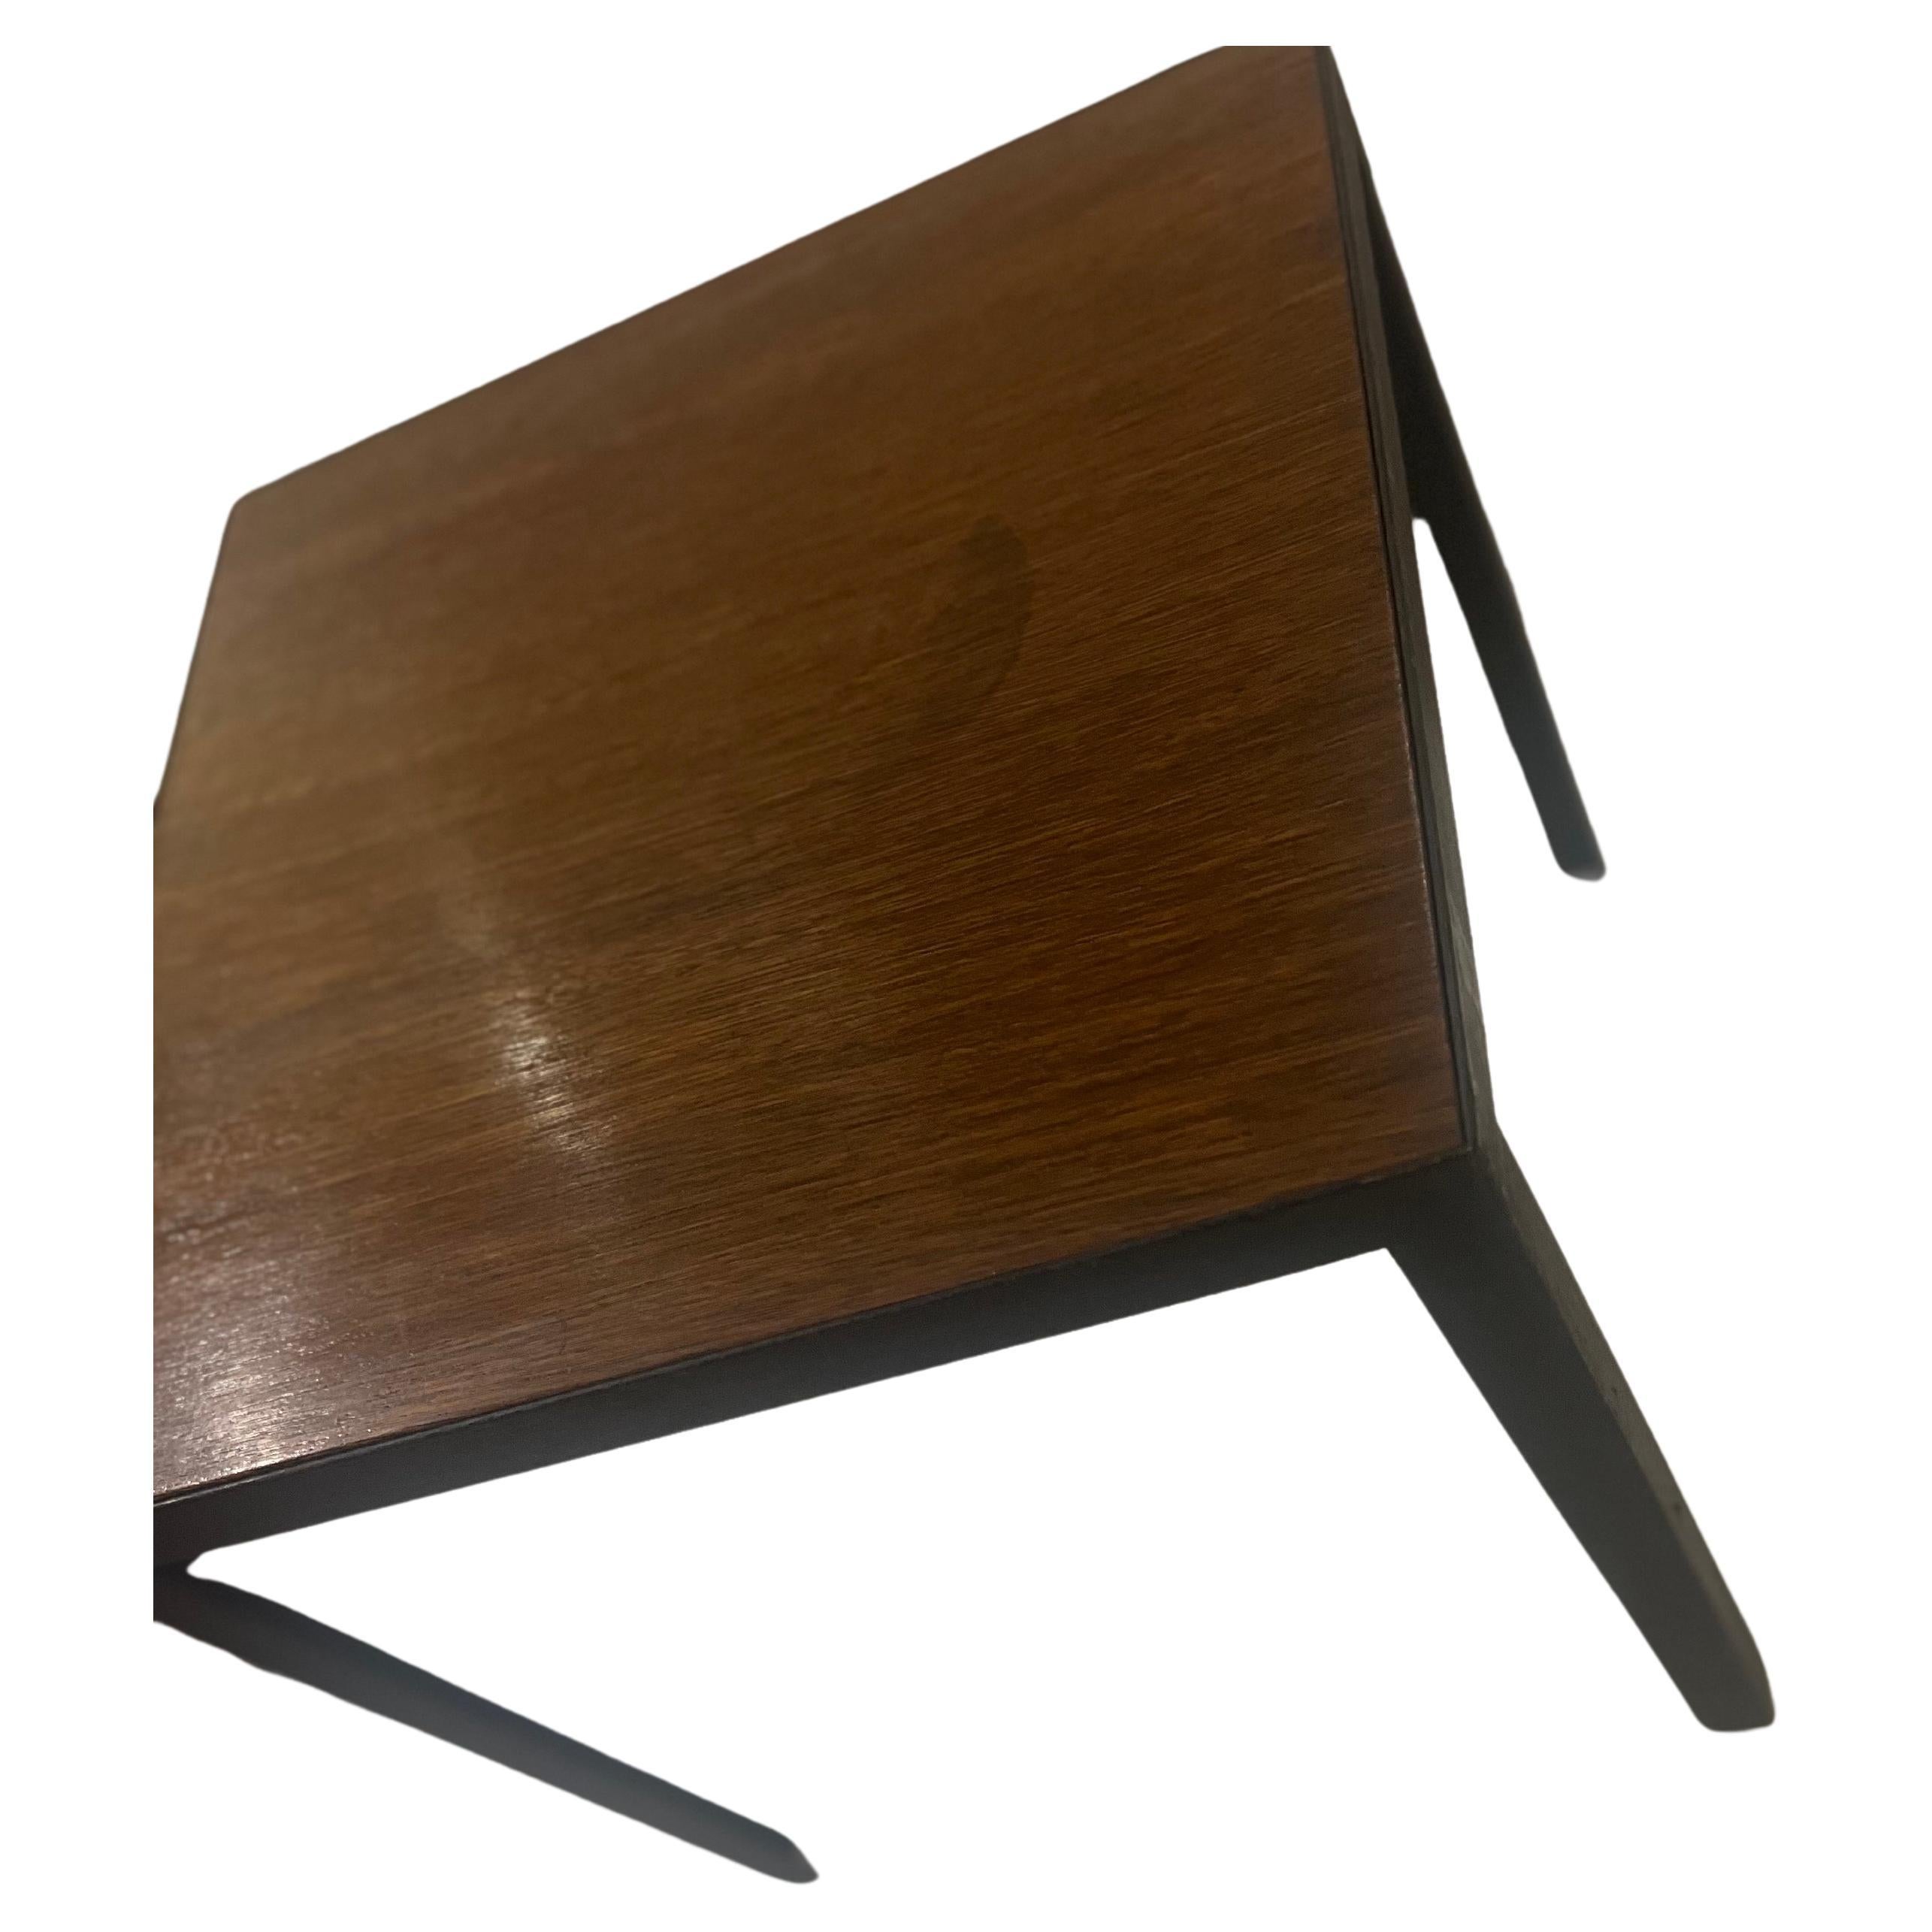 American mid century modern small cocktail end table , solid enameled black steel frame with a walnut top freshly refinished , circa 1970's, great for cocktail end table simple elegant mid century , danish modern
Introducing our American Mid Century